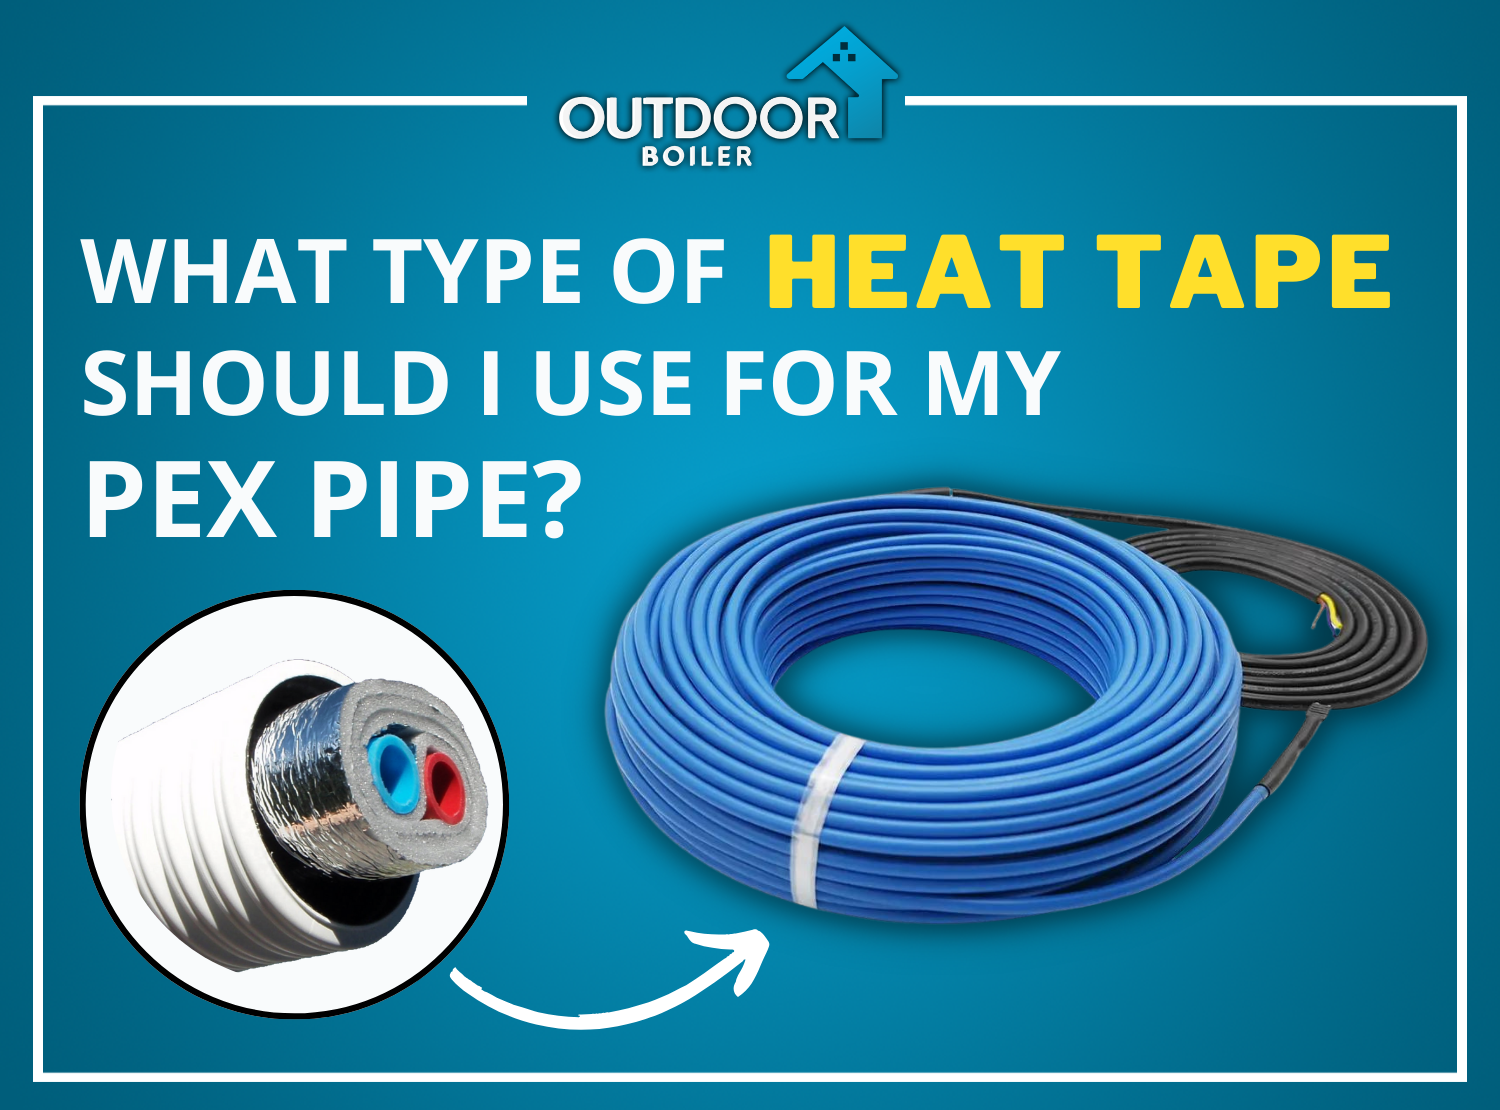 What Type of Heat Tape Should I Use for My PEX Pipe